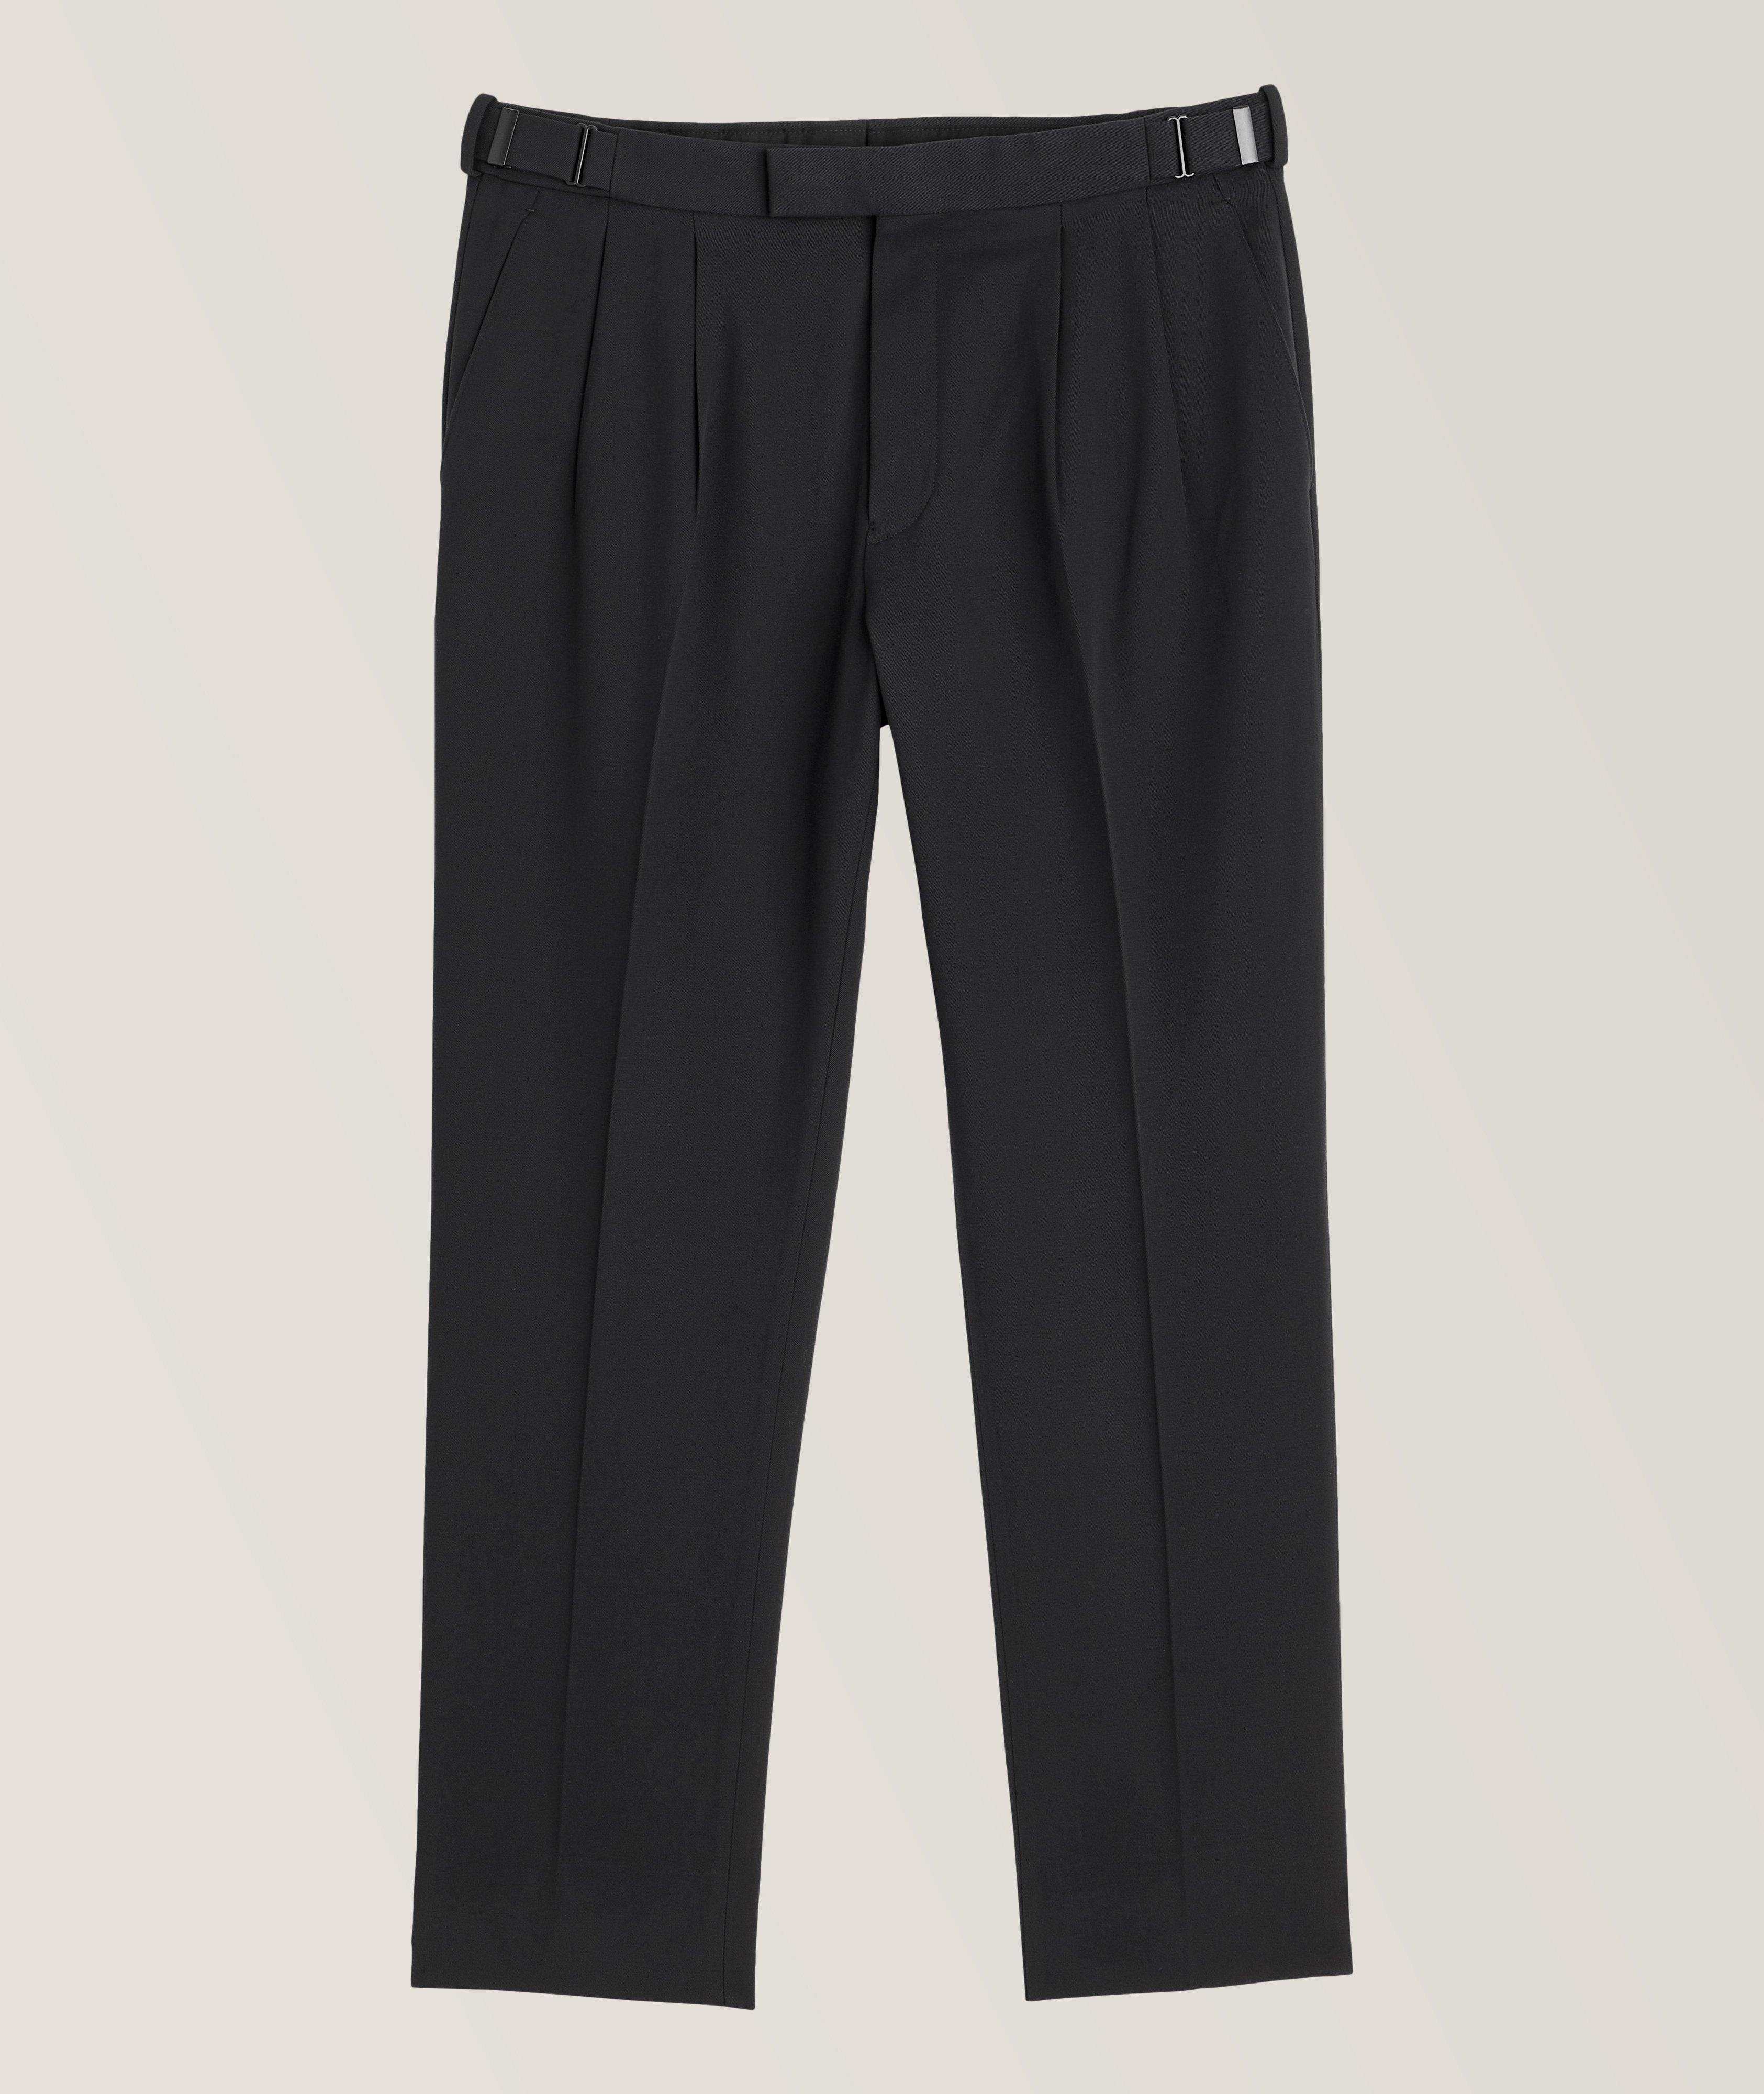 Cotton-Wool Double Pleated Pants image 0